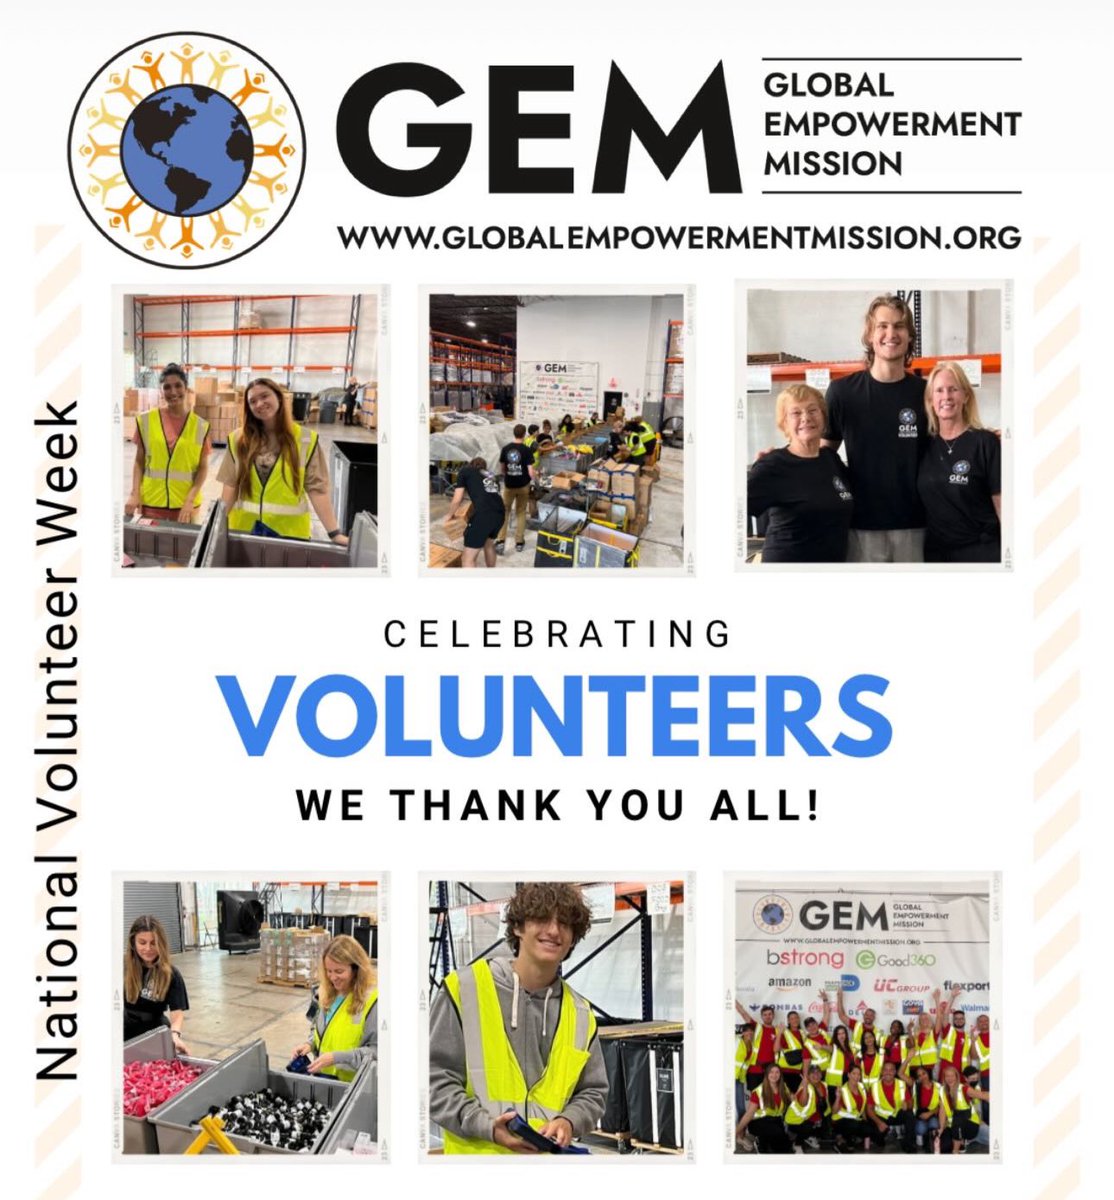 In celebration of #NationalVolunteerWeek, #GEM is highlighting the incredible contributions of our cherished community volunteers. These dedicated individuals are crucial to GEM's mission of delivering aid globally to those in need. Our volunteers are the backbone of our…